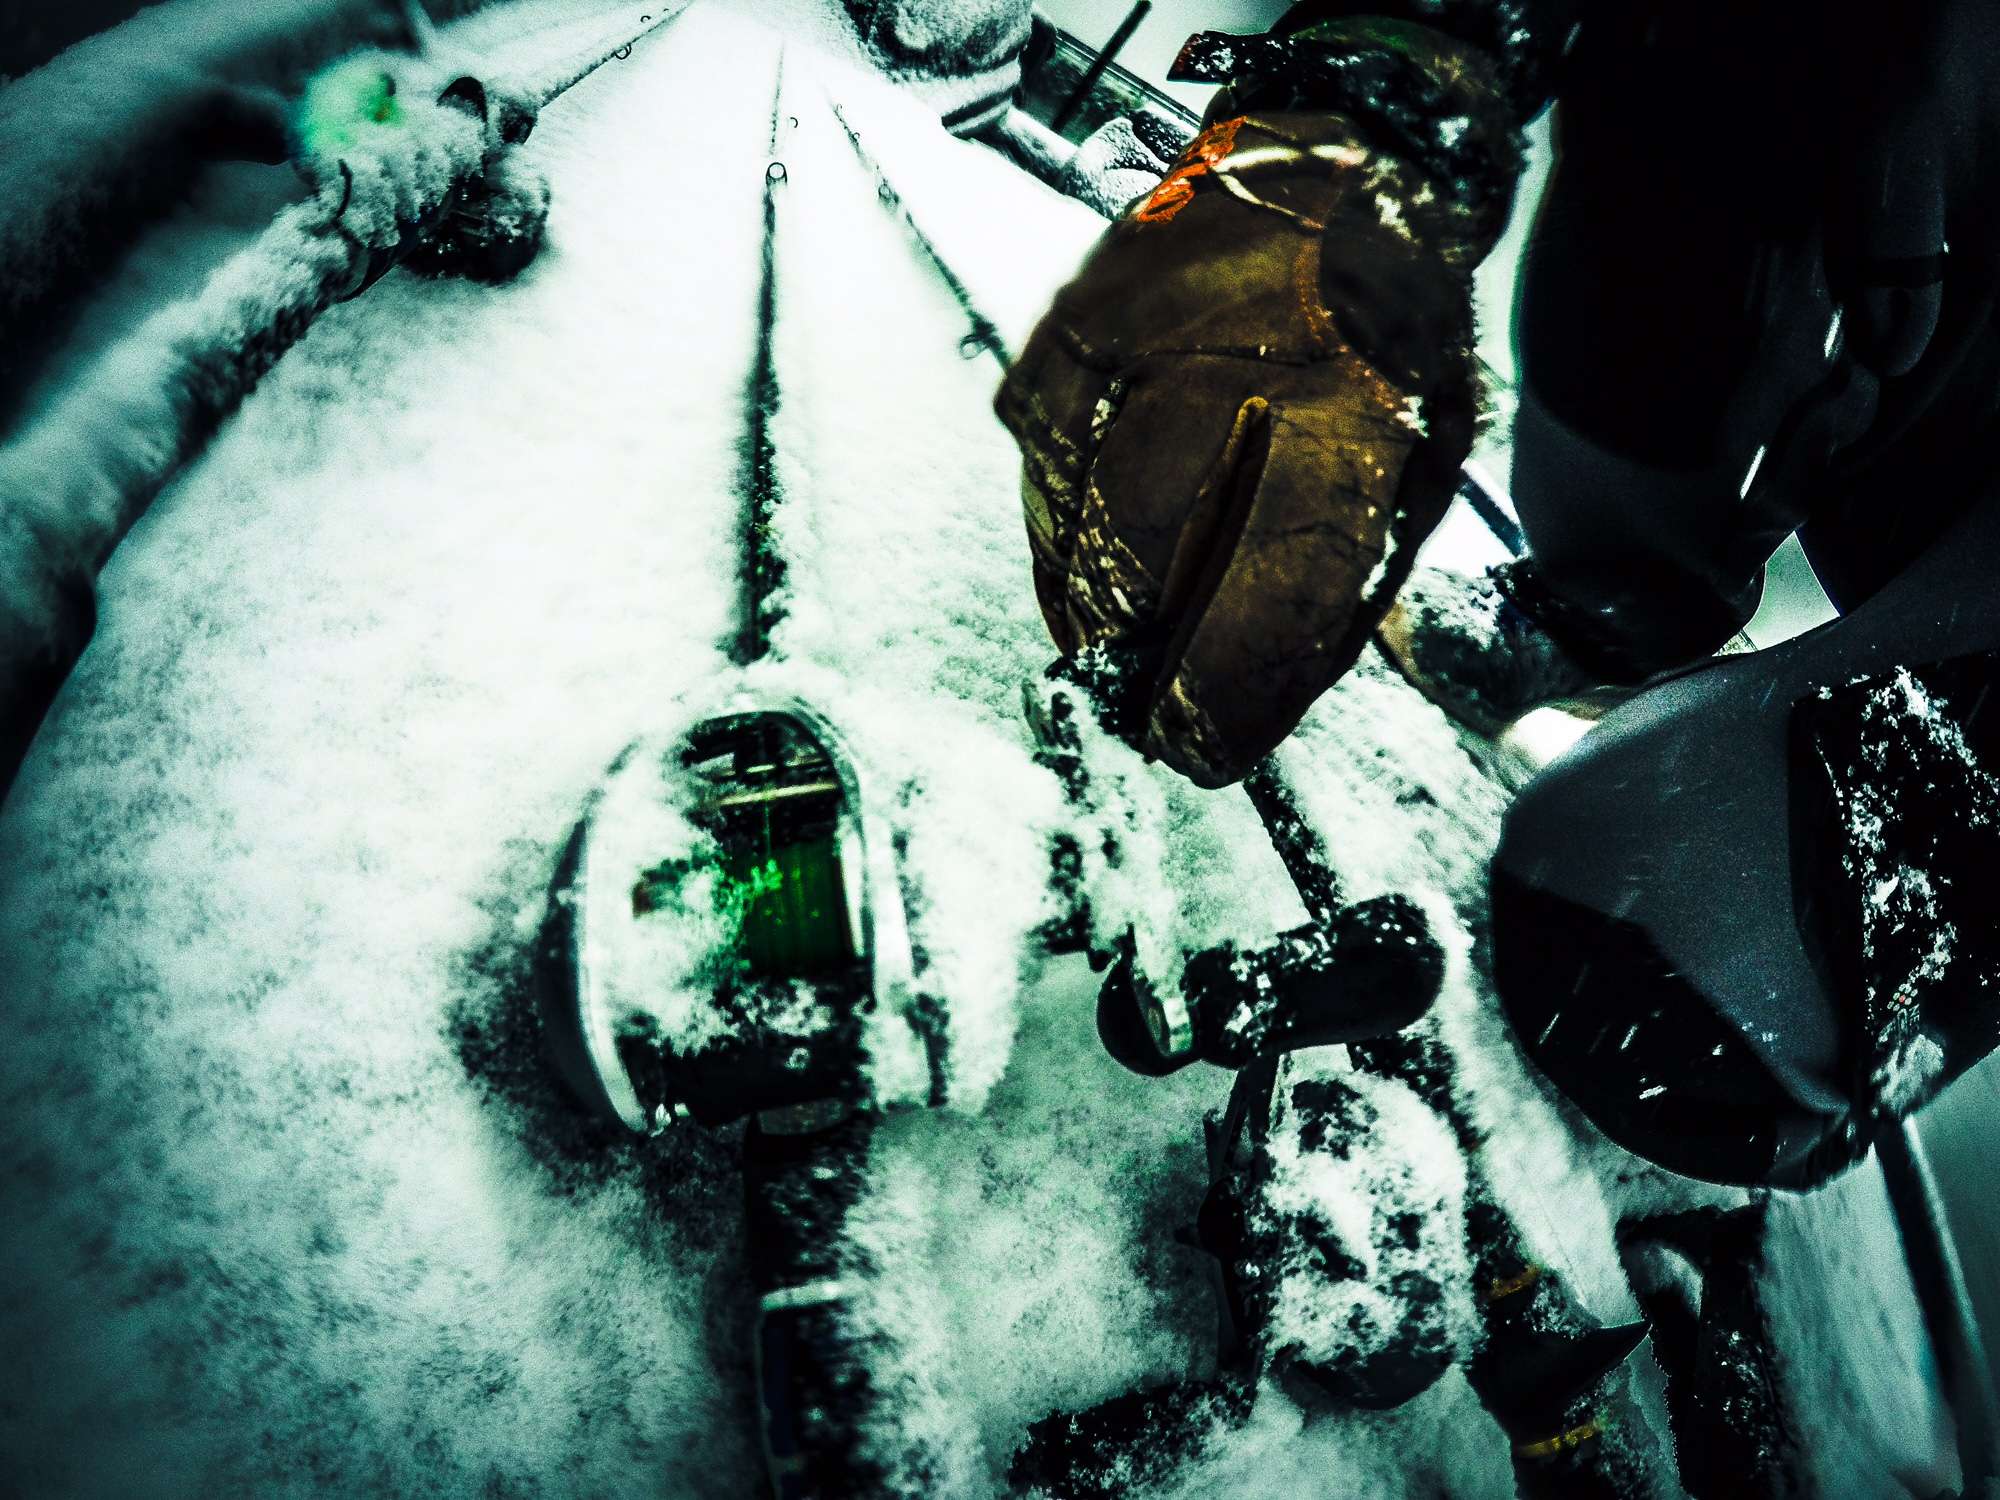 You can fish your way through the snow, as shown by Carl Jocumsen.